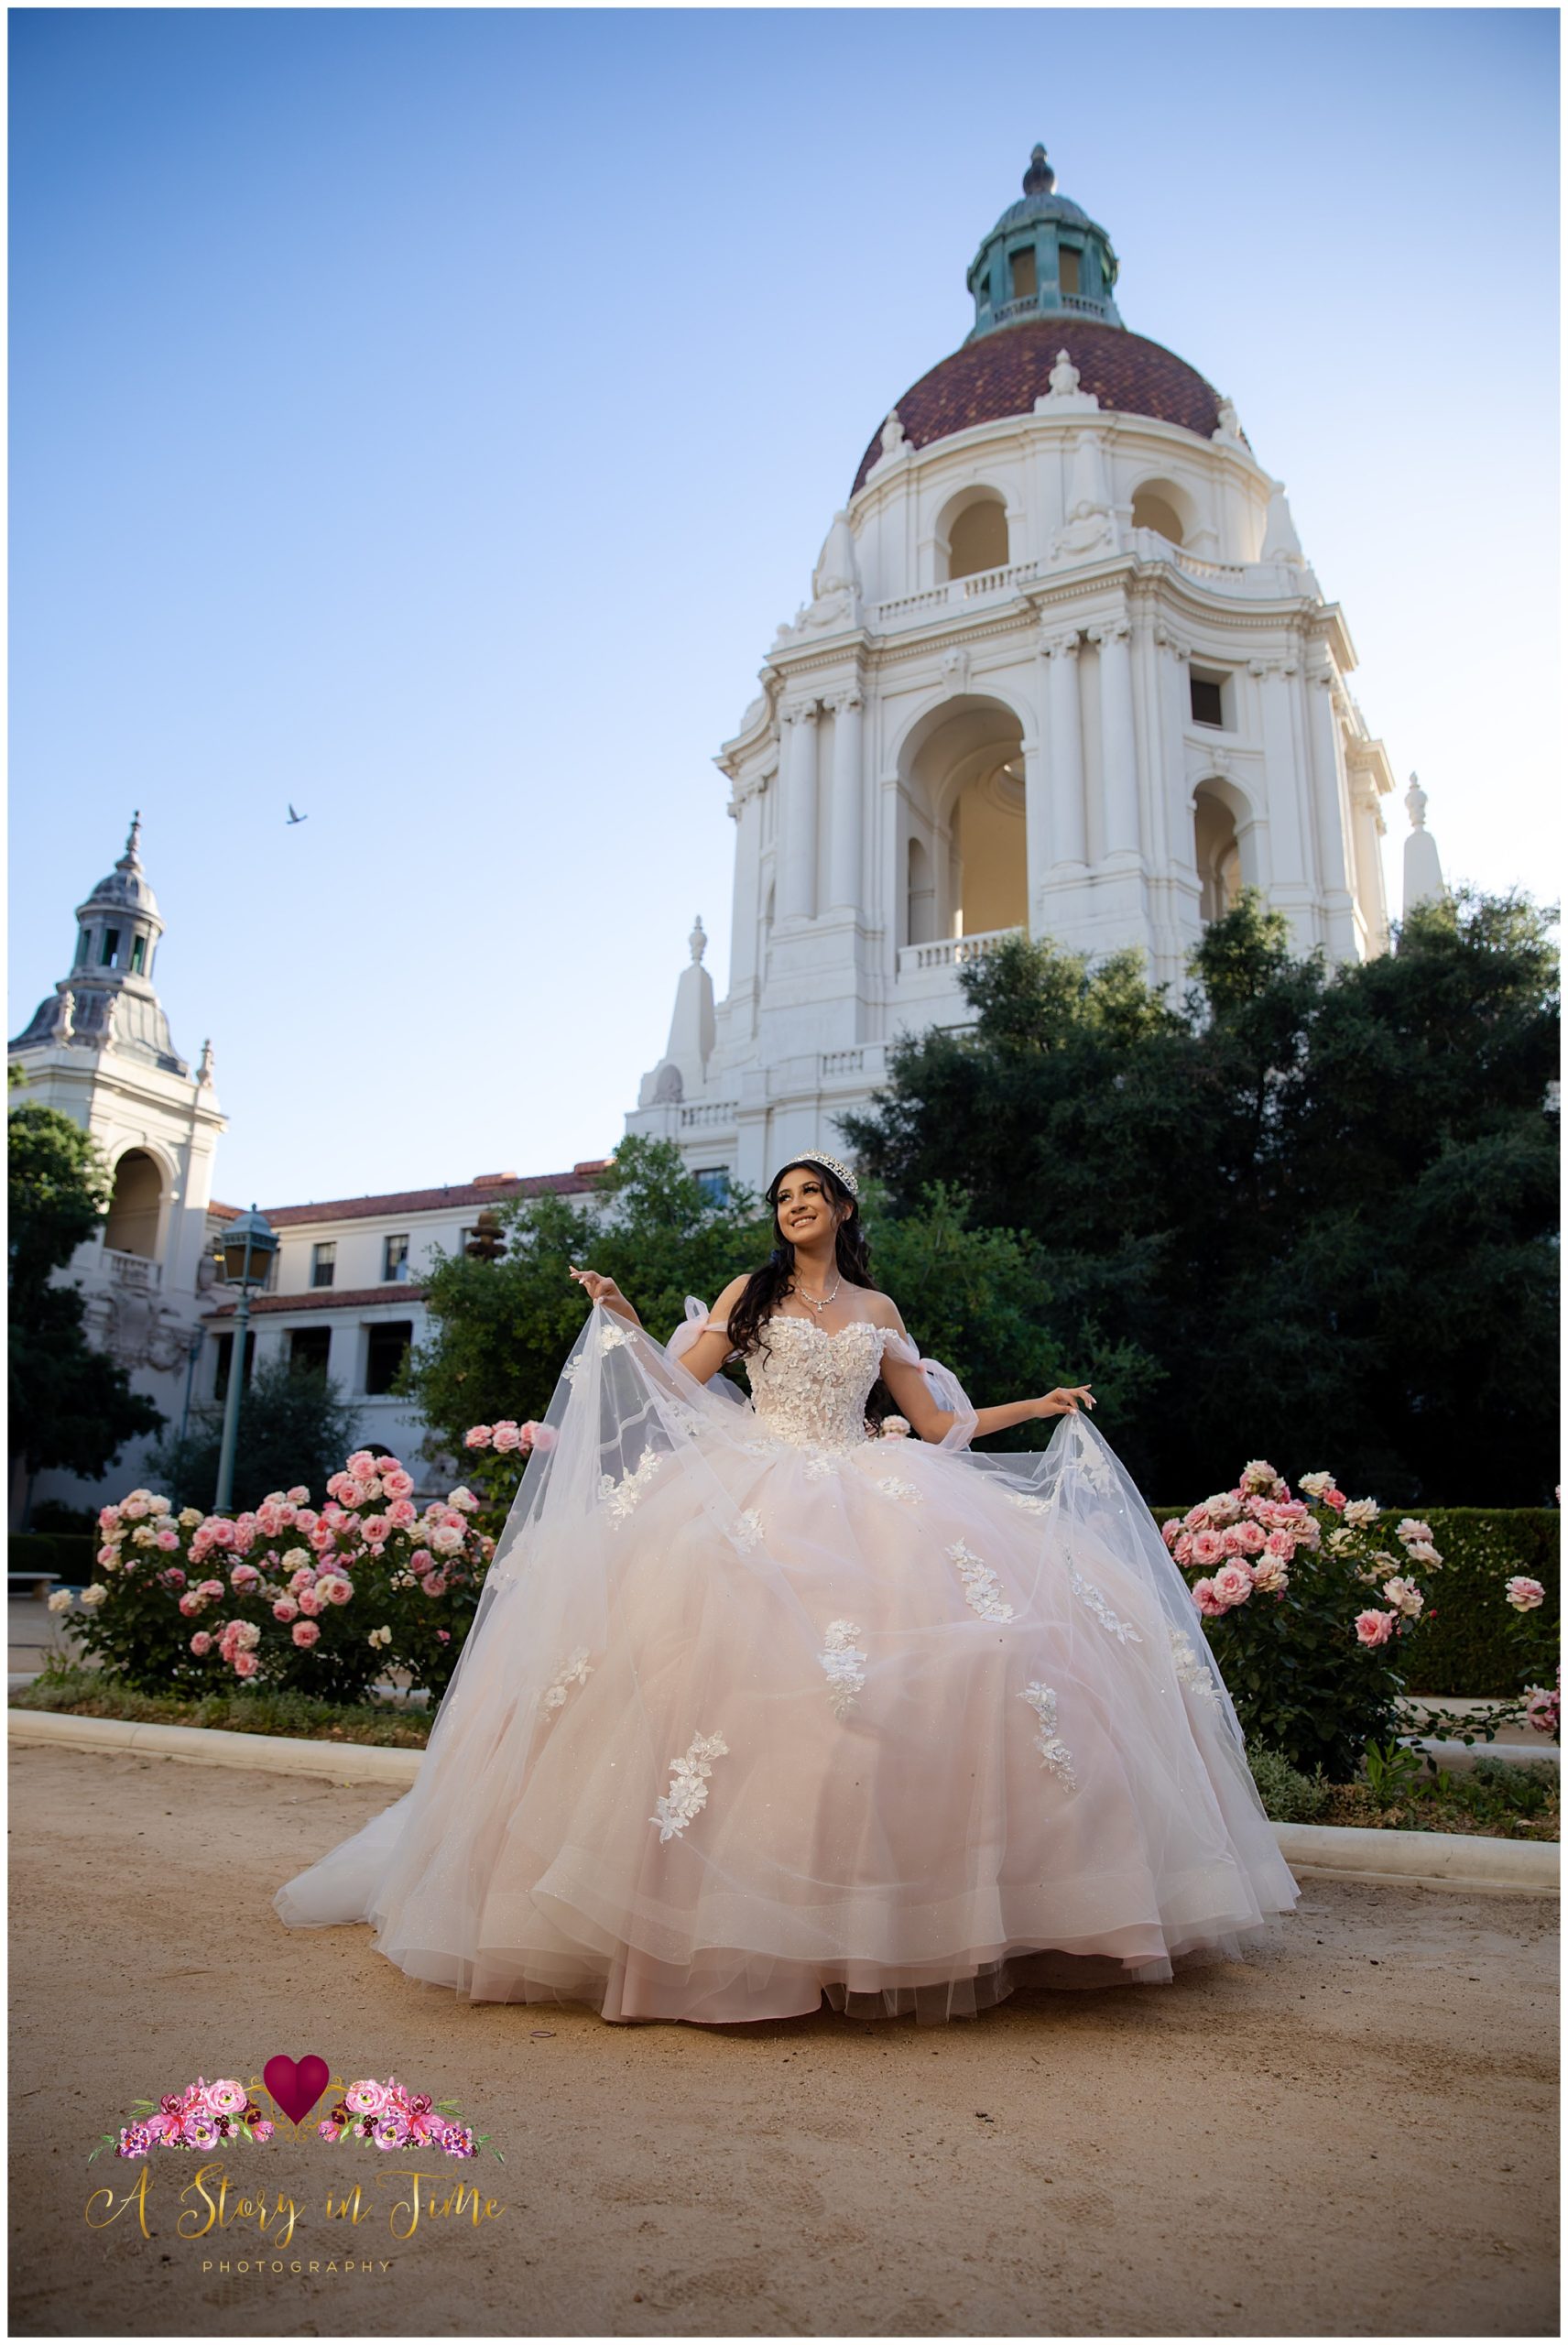 Pasadena City Hall/ Quinceañera Photography/ Natalie » Story In Time